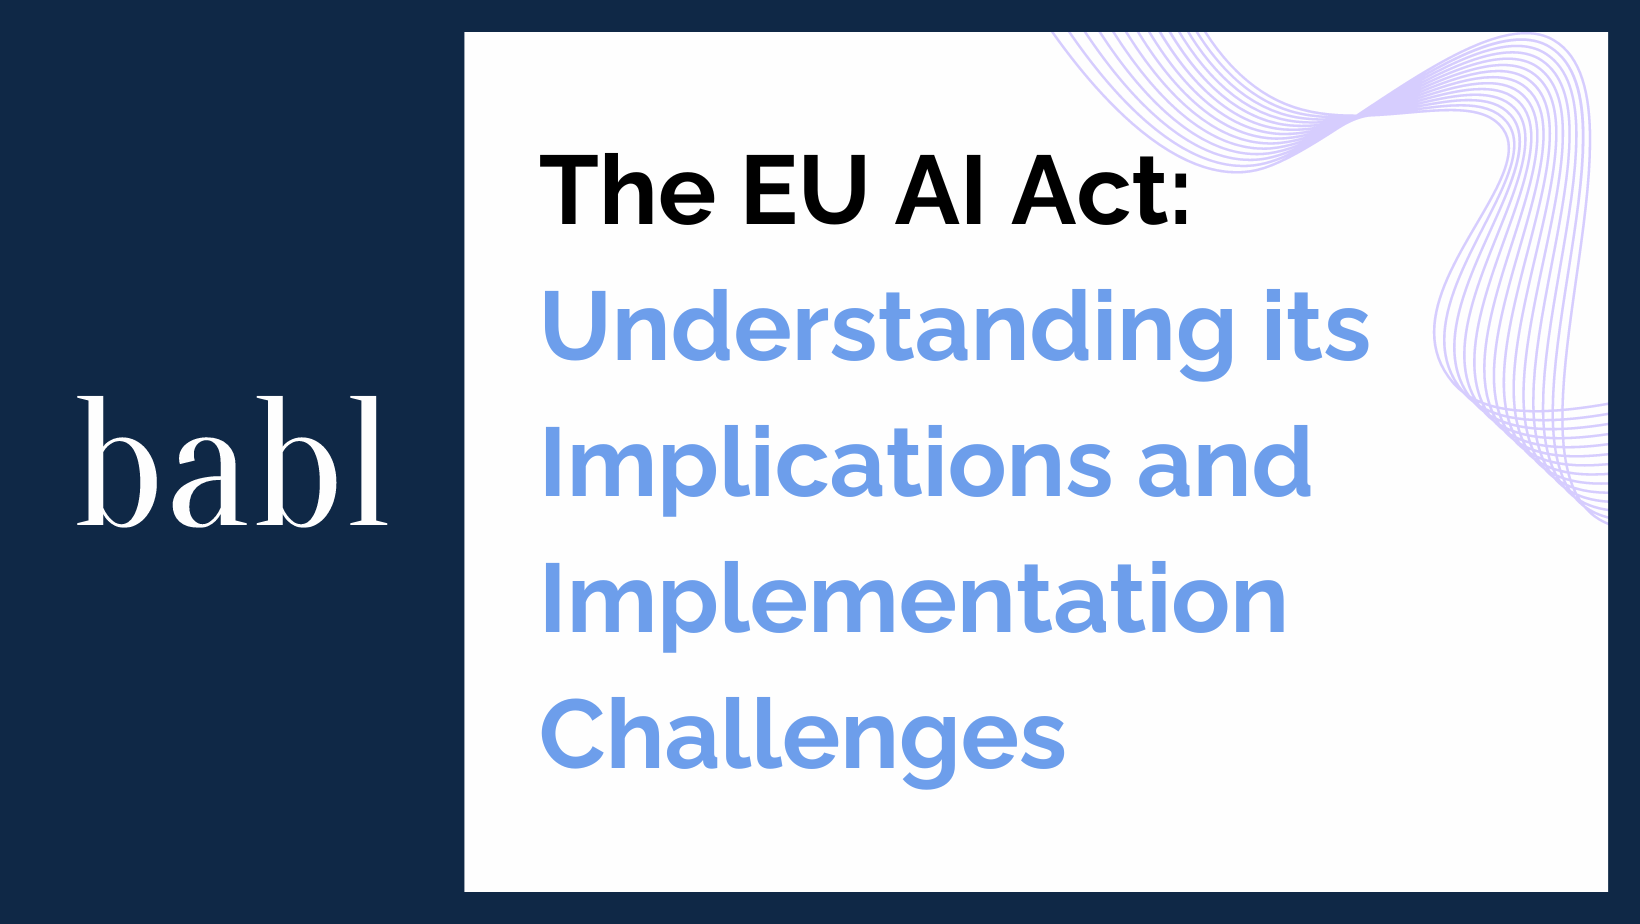 The EU AI Act: Understanding its Implications and Implementation Challenges